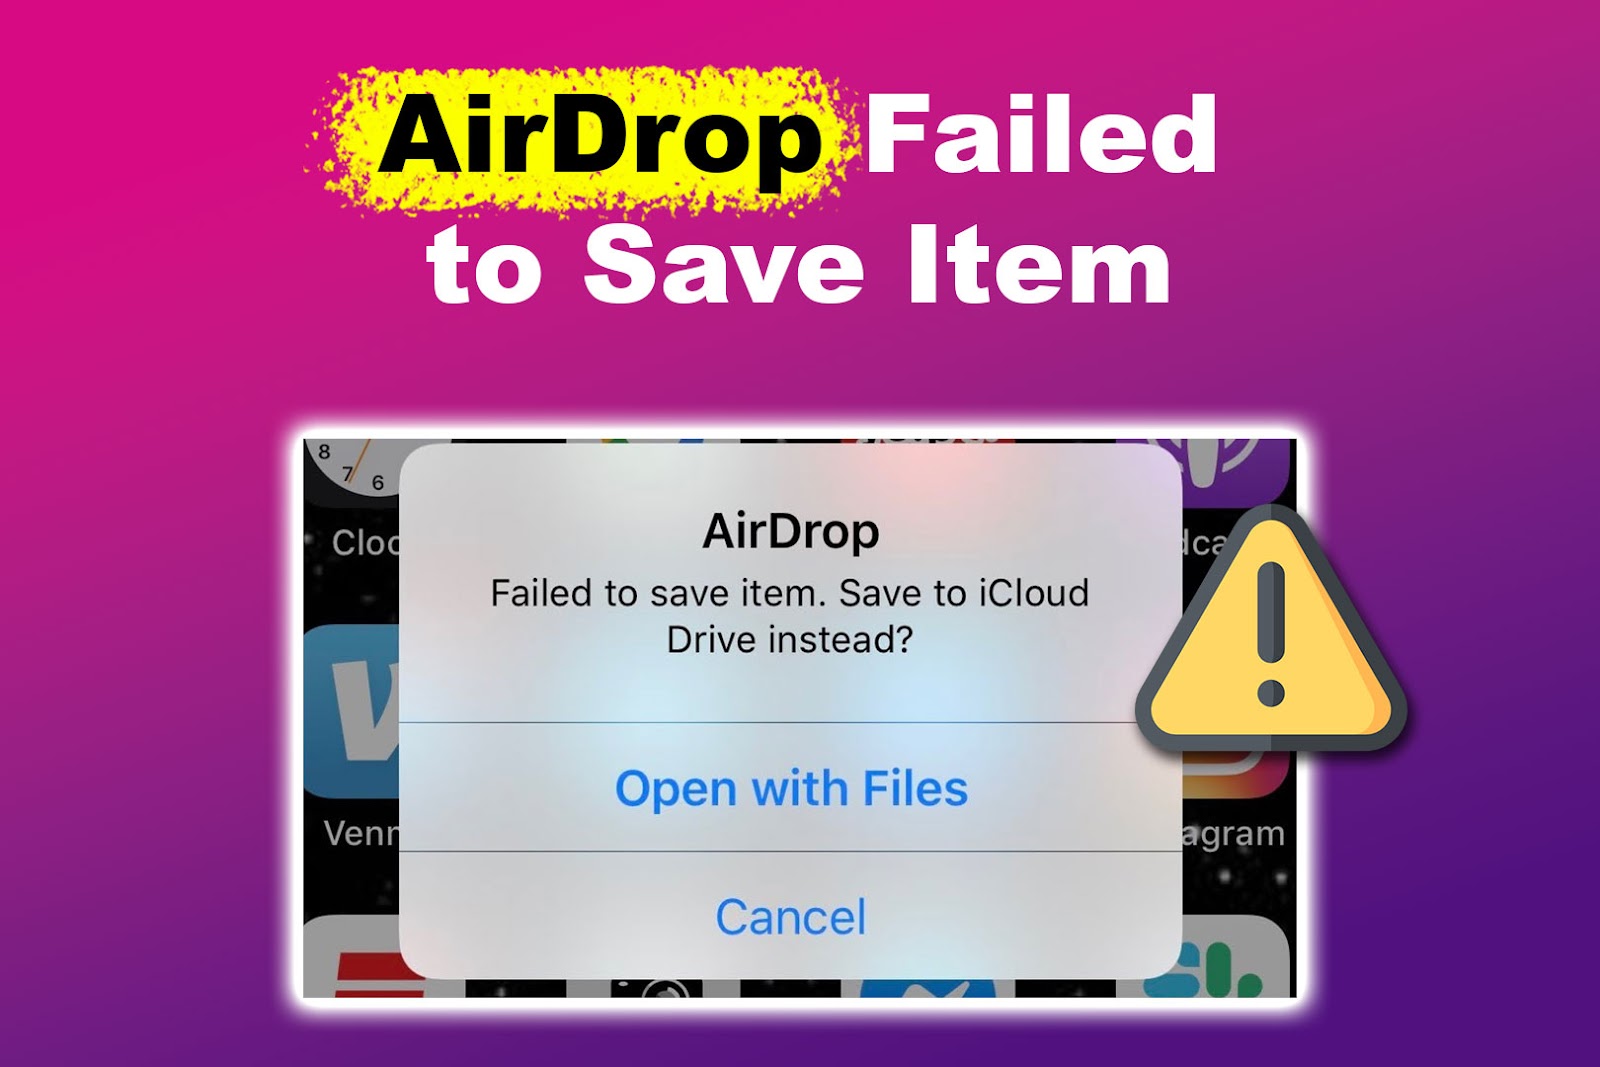 5 Easy Solutions to AirDrop “Failed to Save Item”